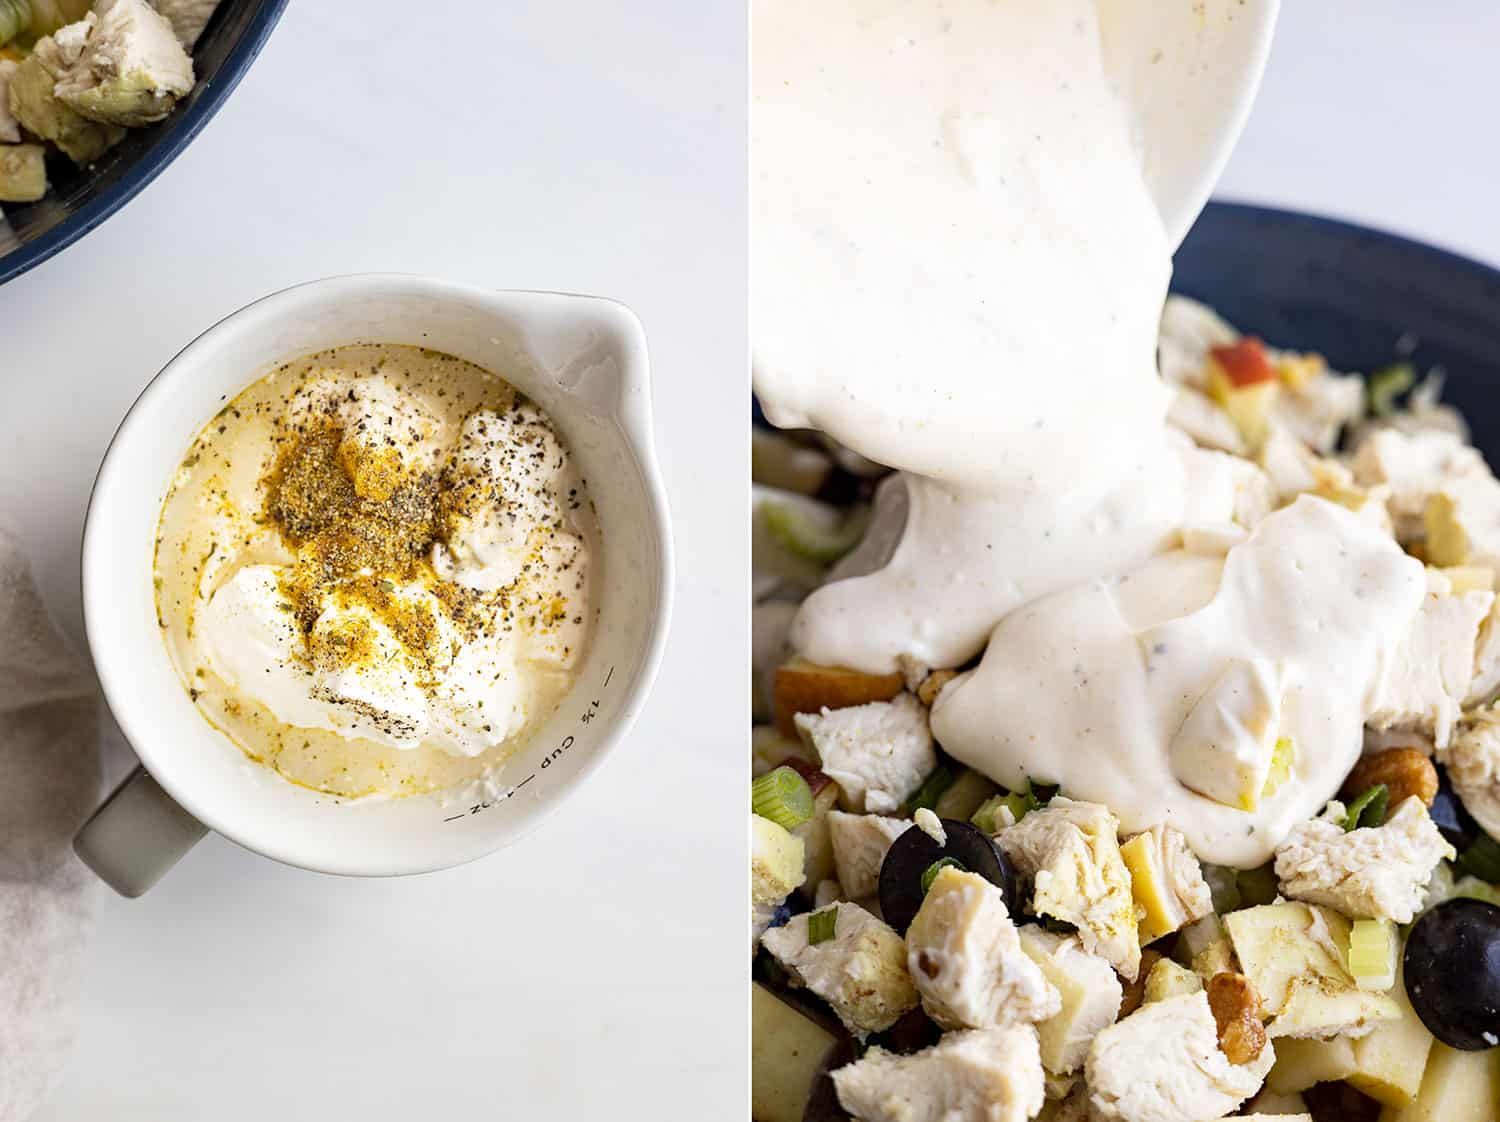 Two pictures of the dressing. One the ingredients in a small bowl and the other showing the dressing being poured over the salad. 